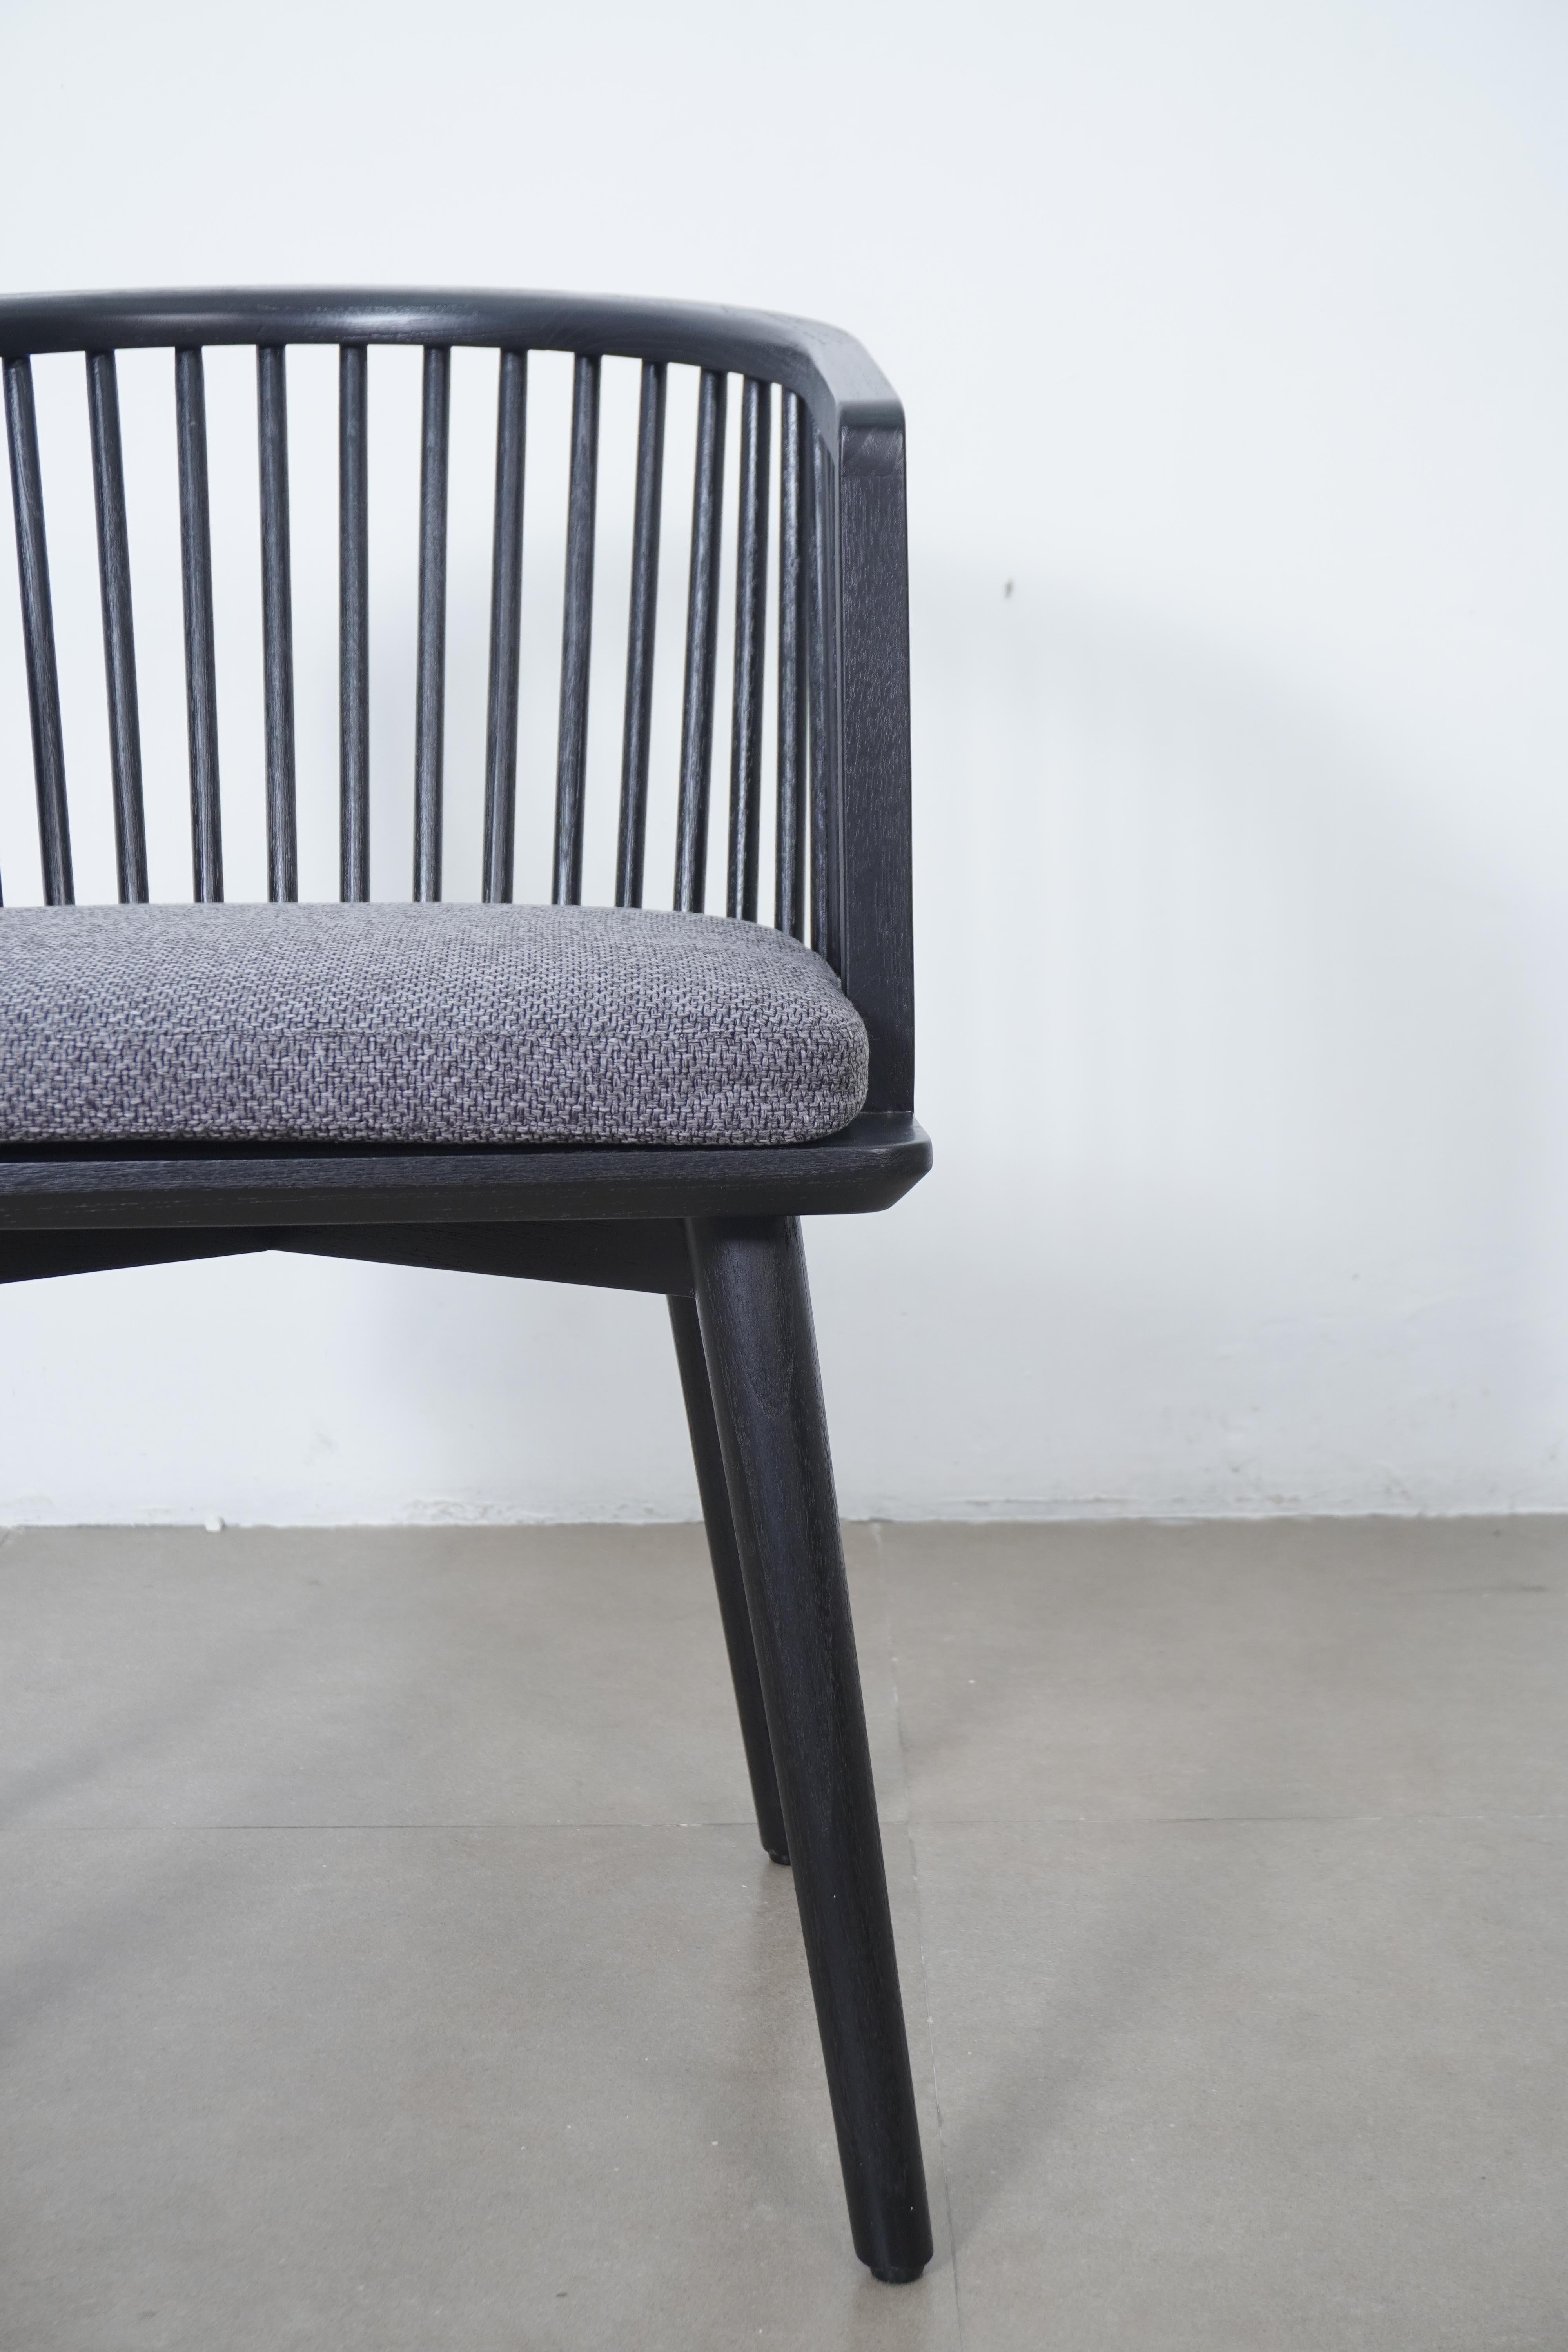 Modern Danish Peasant Dining Chair, Teak in Black Finish. Set of 6 chairs For Sale 6